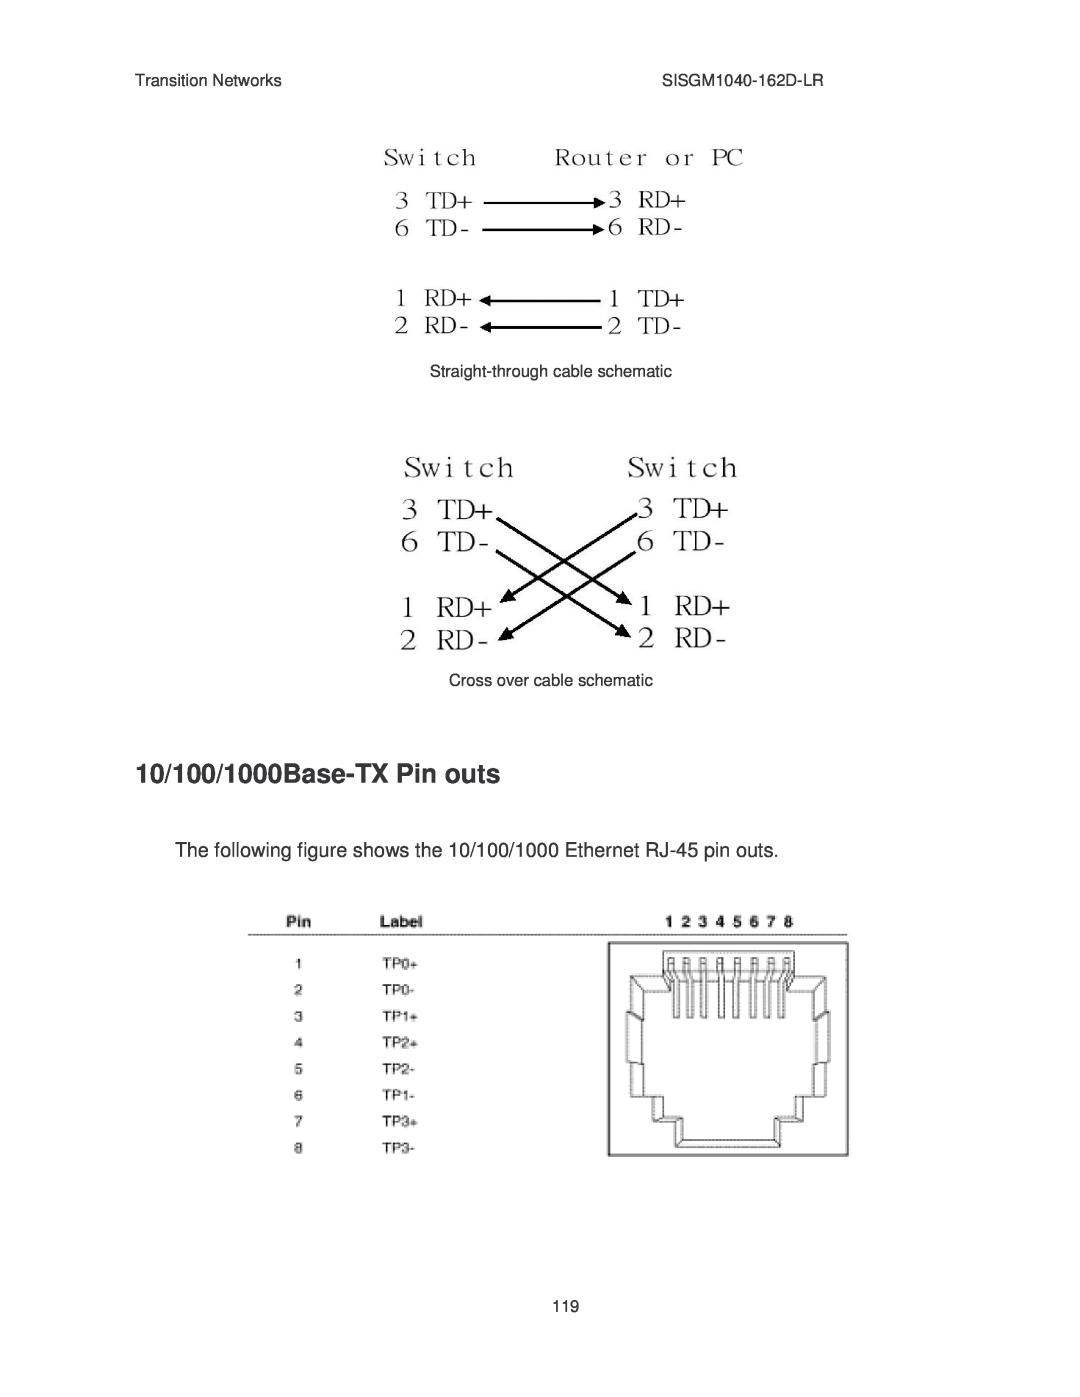 Transition Networks manual 10/100/1000Base-TX Pin outs, Transition Networks, SISGM1040-162D-LR 